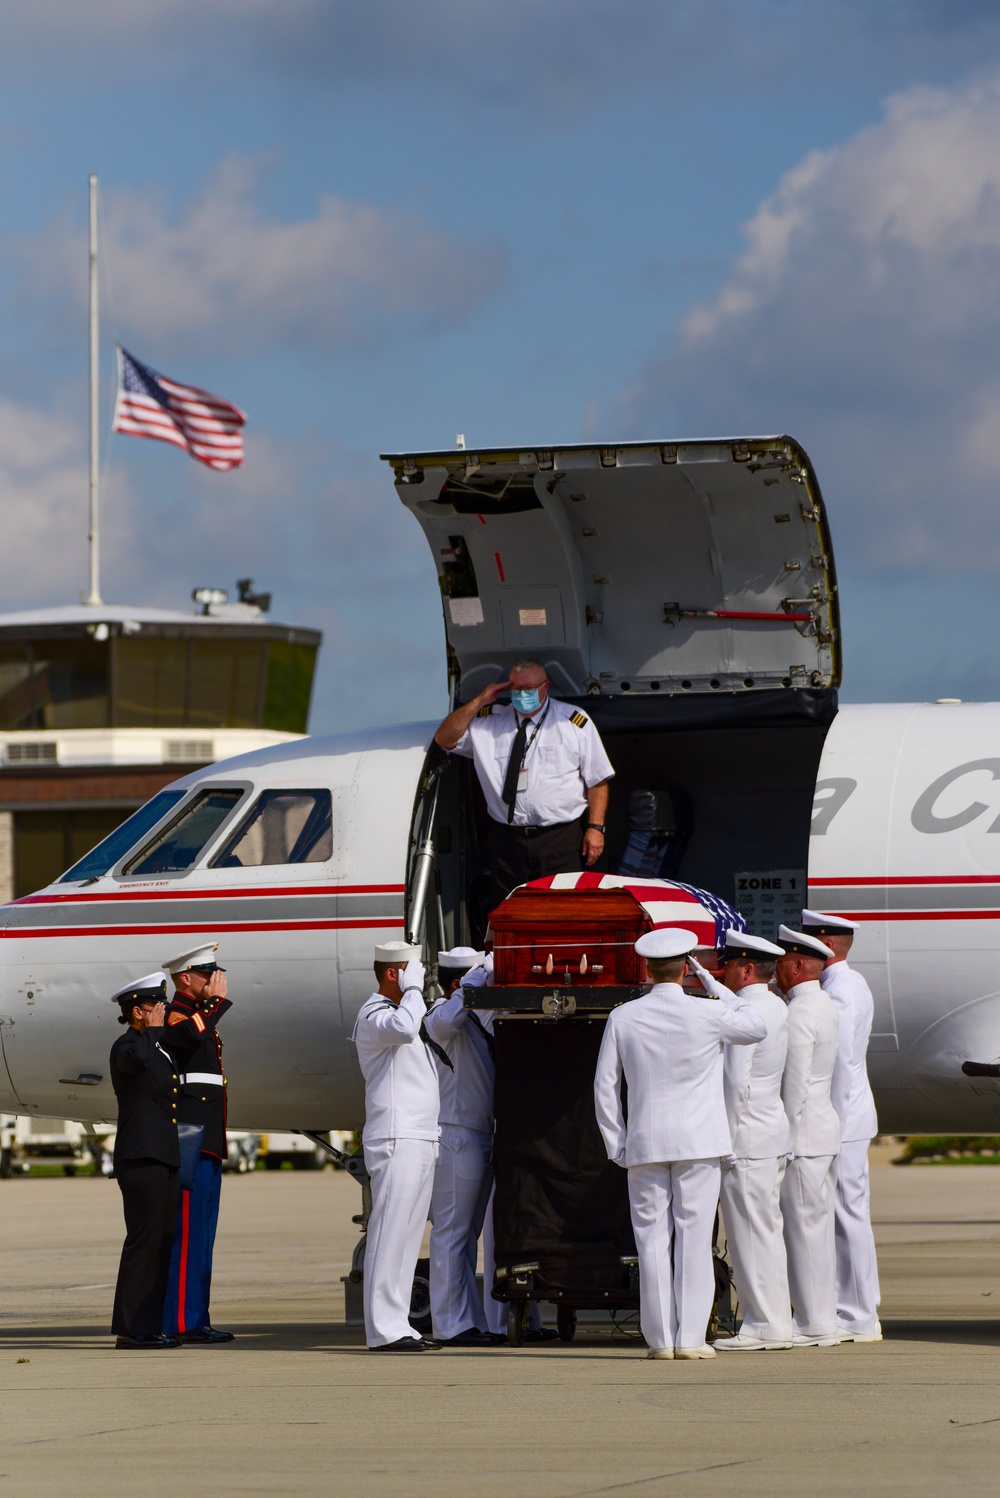 HM3 Soviak's Remains Arrive in Cleveland, Ohio